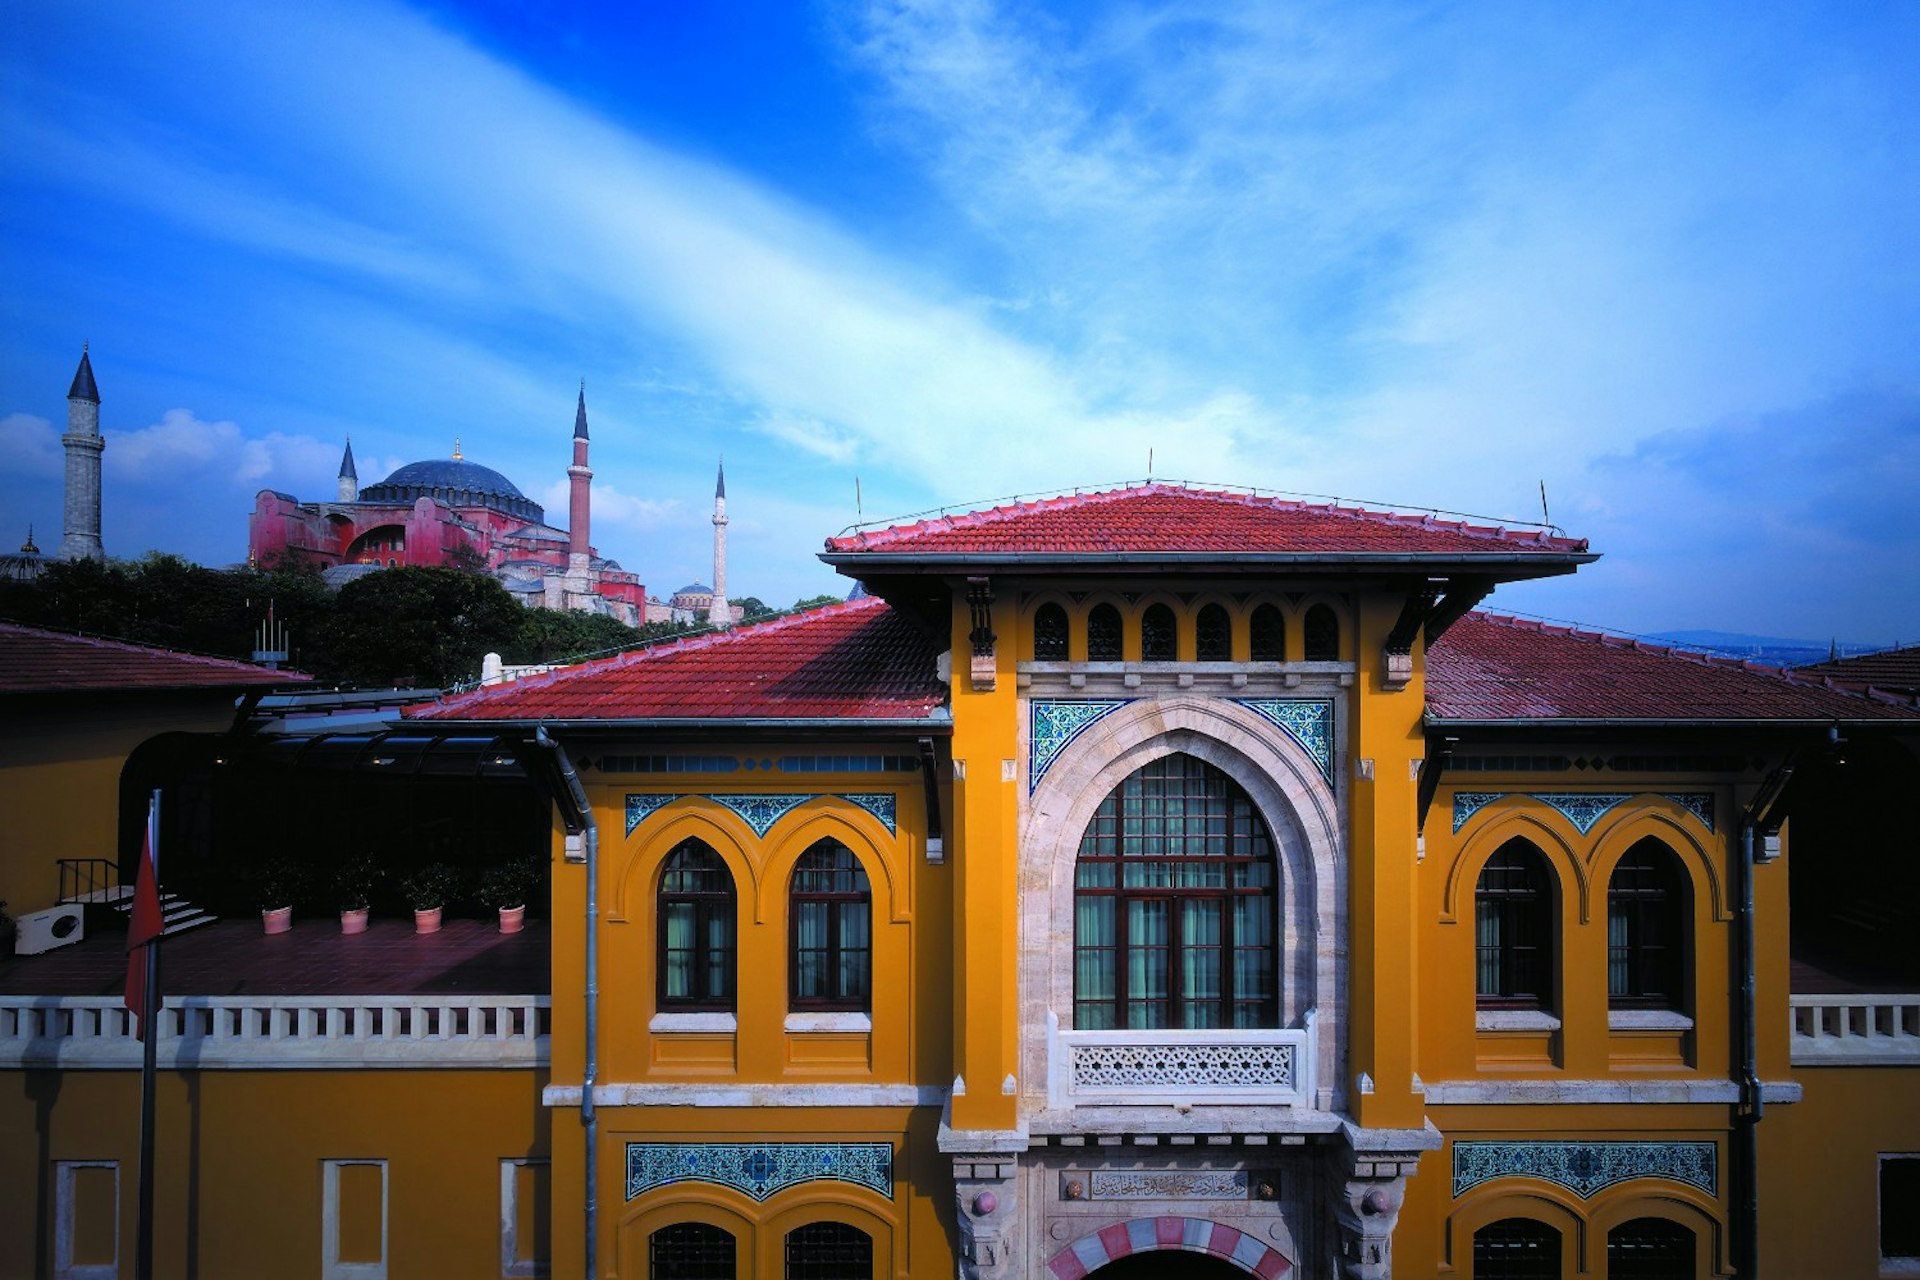 A colourful photograph of a hotel that was once a historic prison in Istanbul.